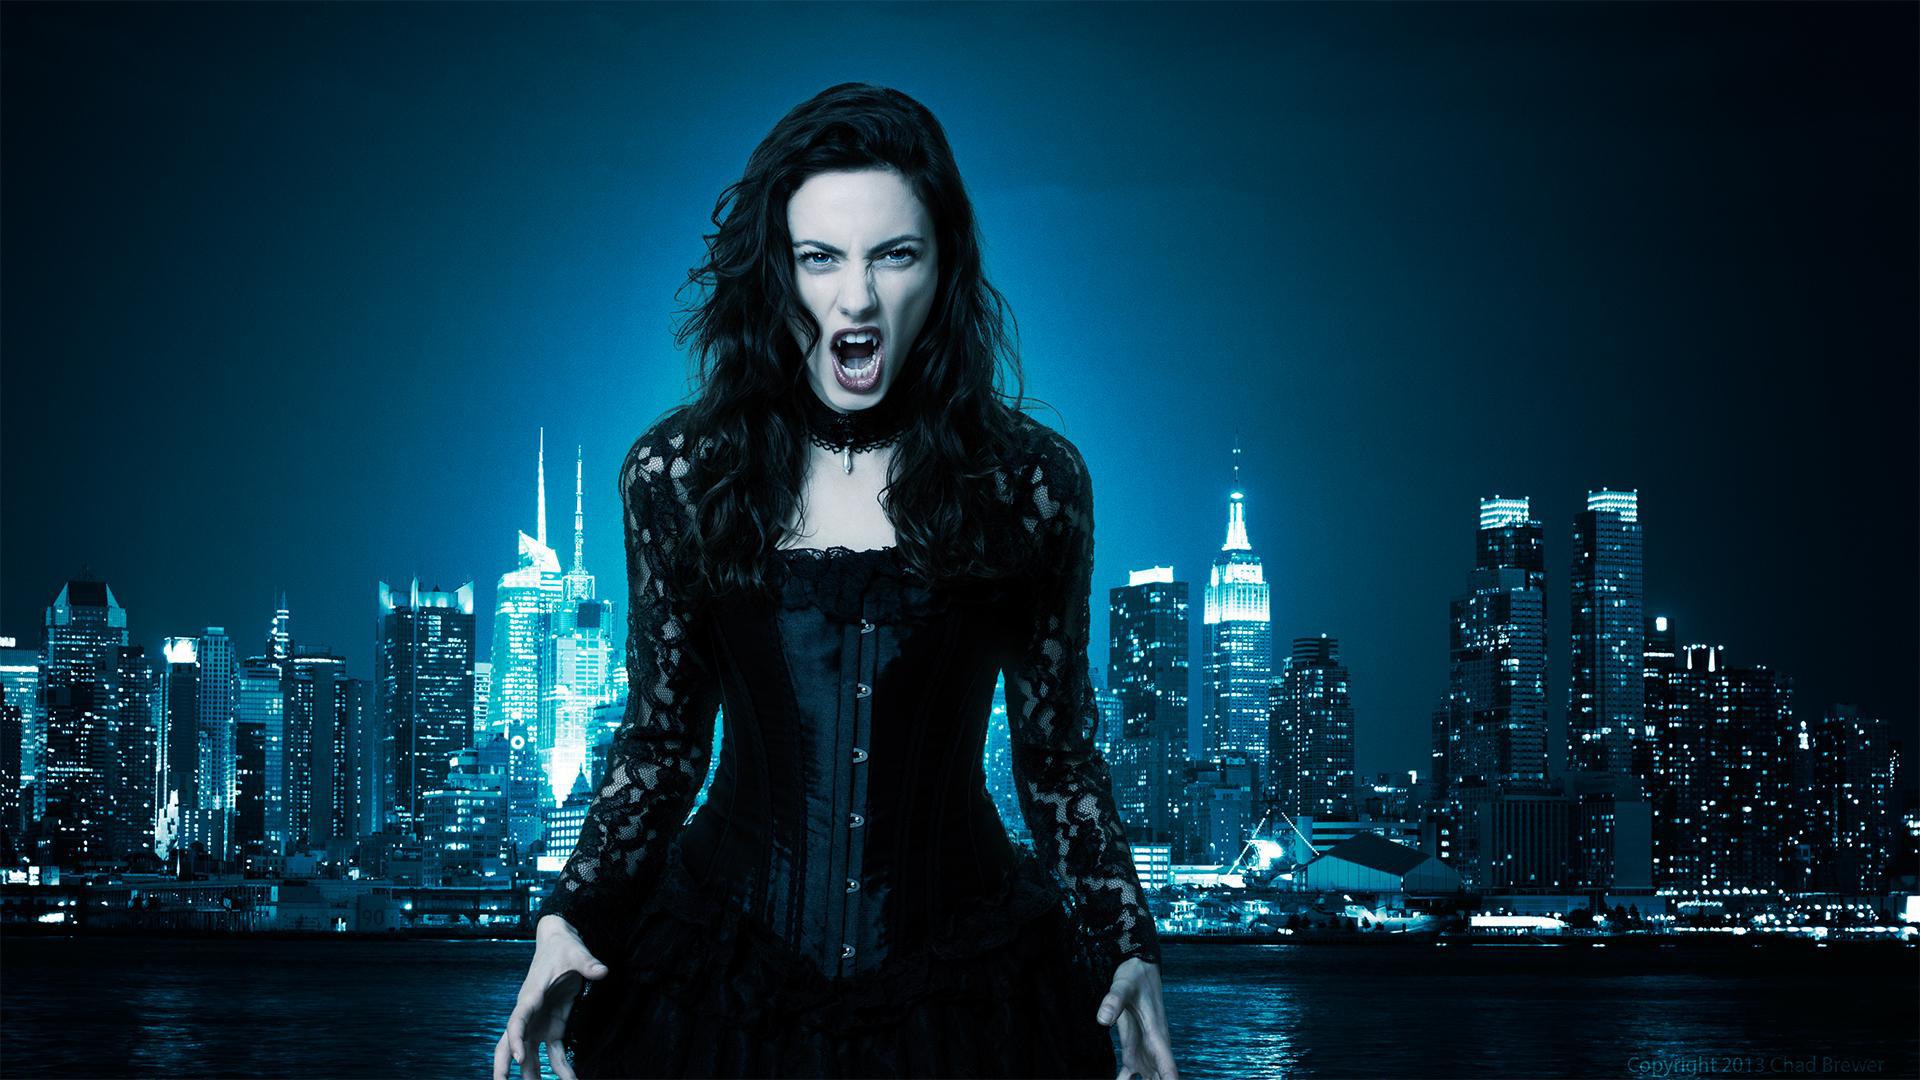 Vampire girl on the background of the city wallpaper and image, picture, photo